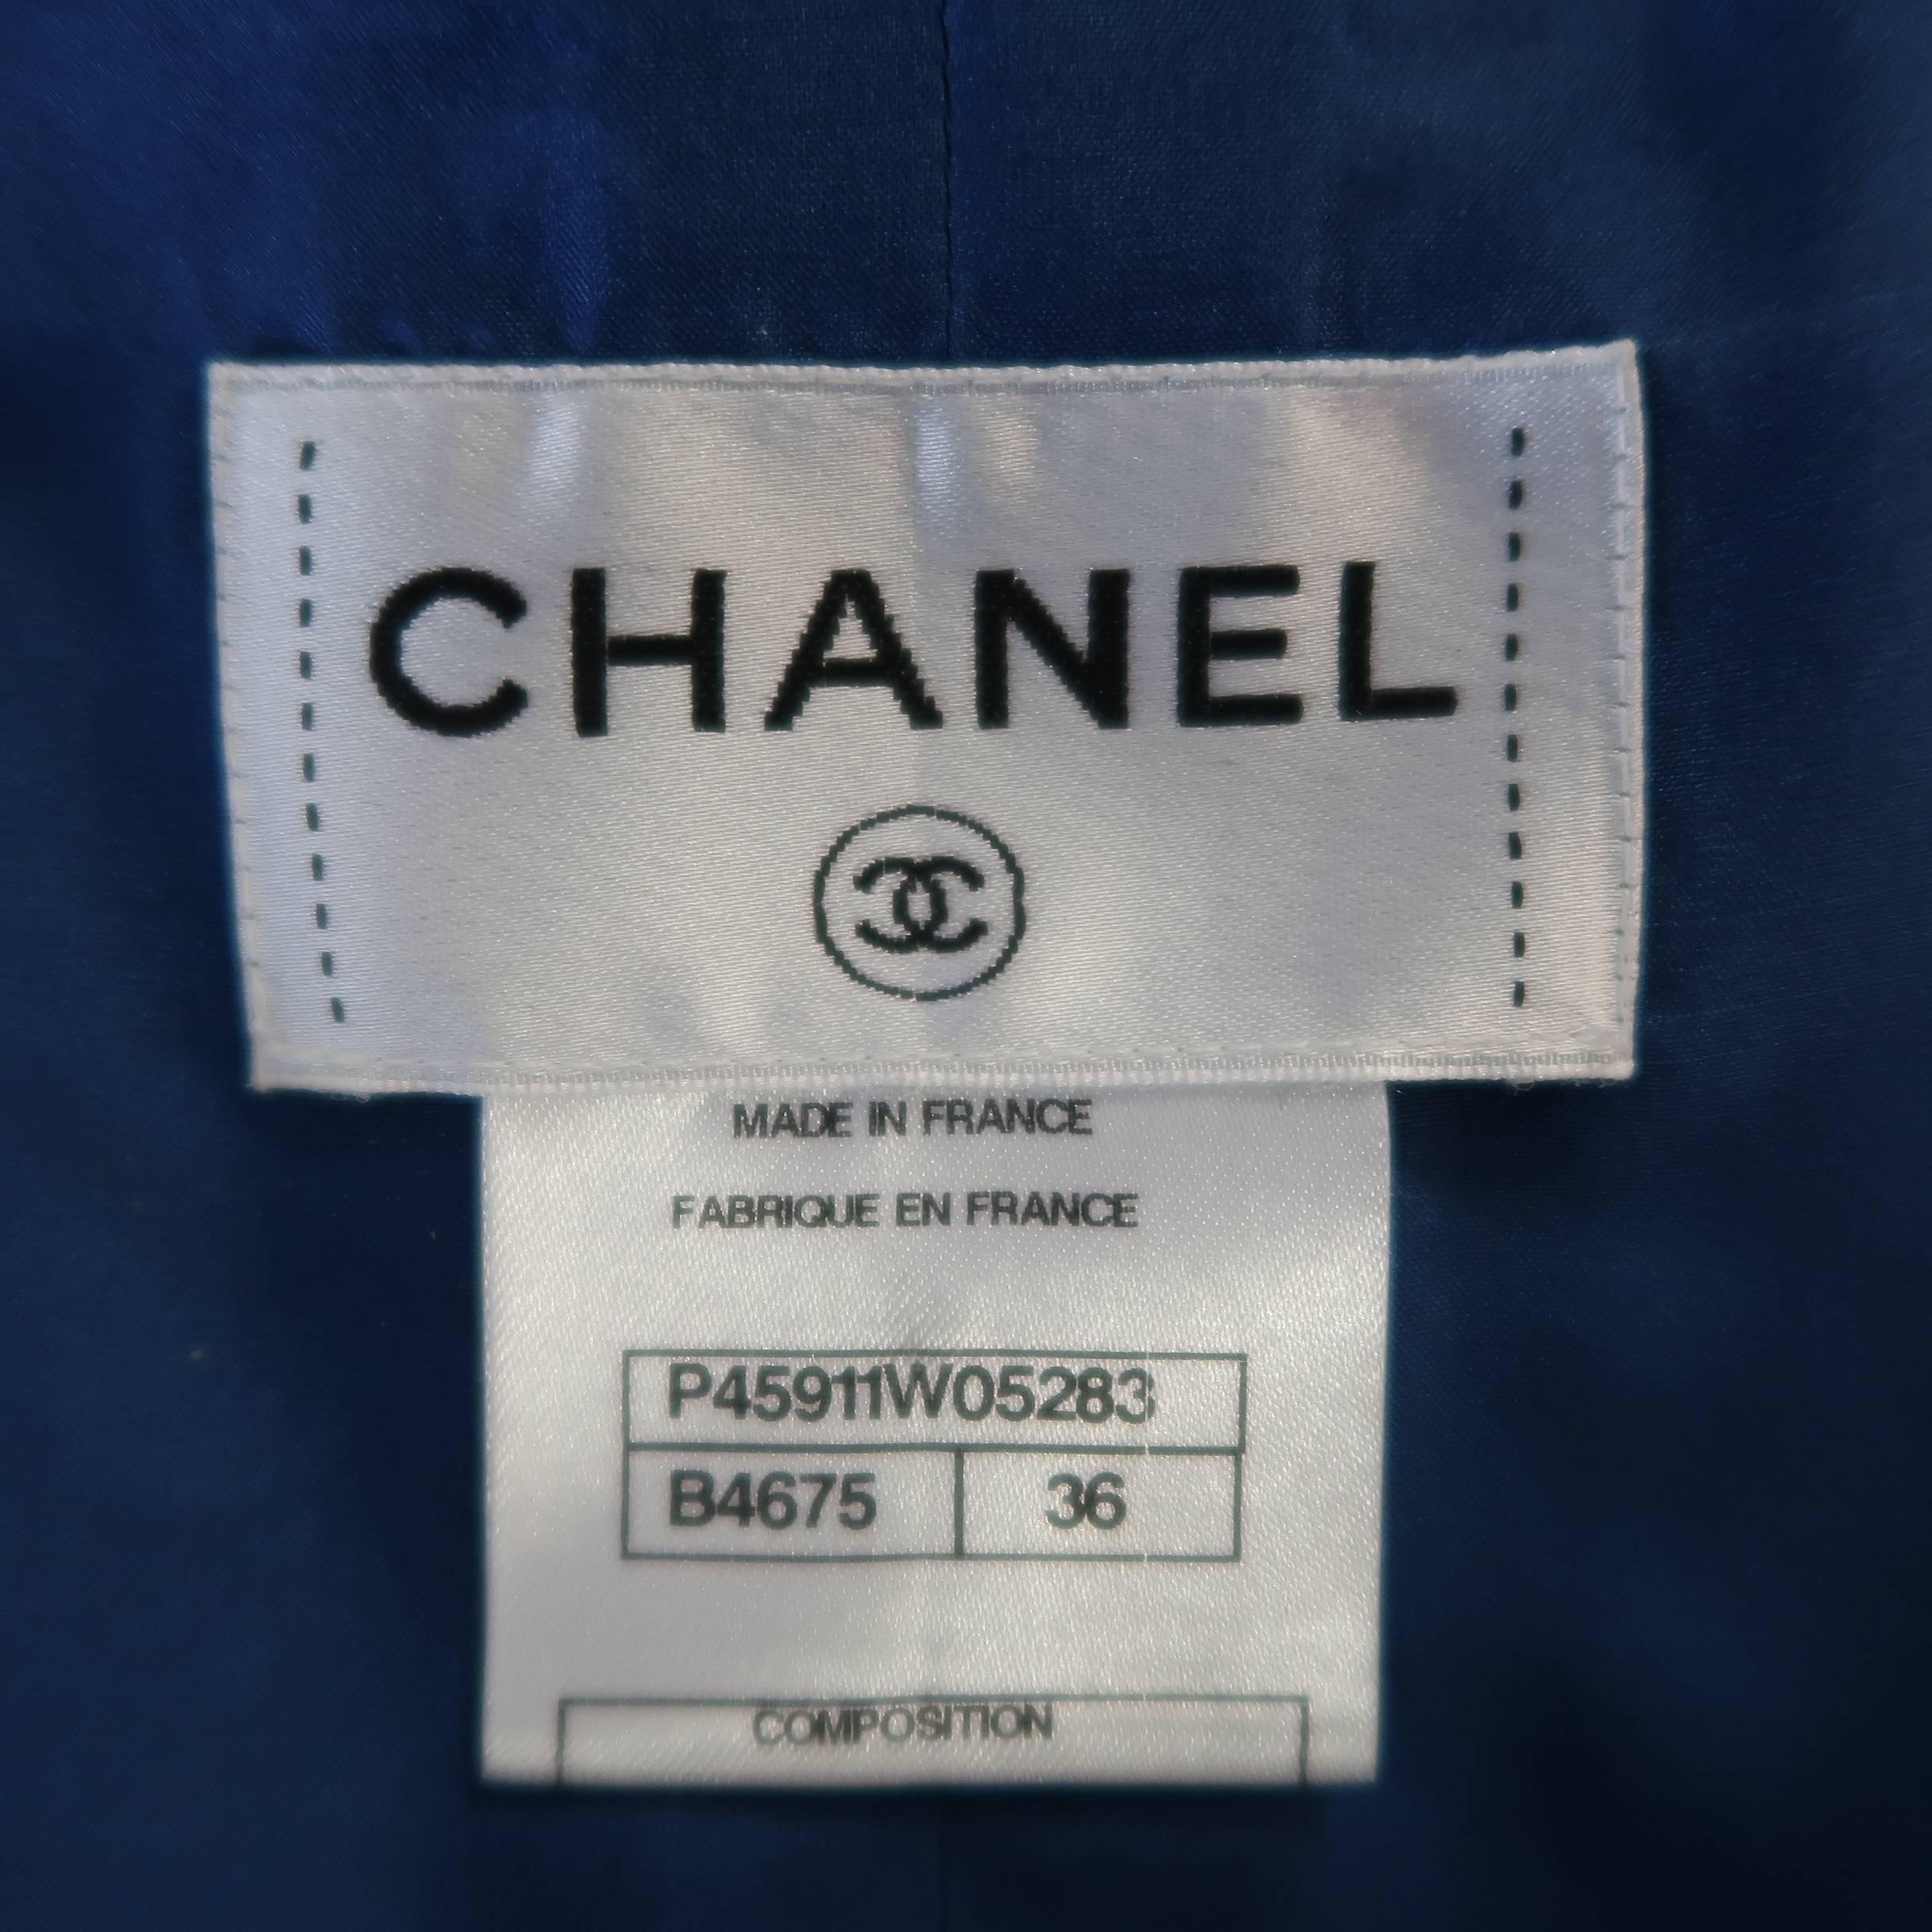 Chanel Dress Blue and White Zip Dress Size 4 US - 36 FR 4